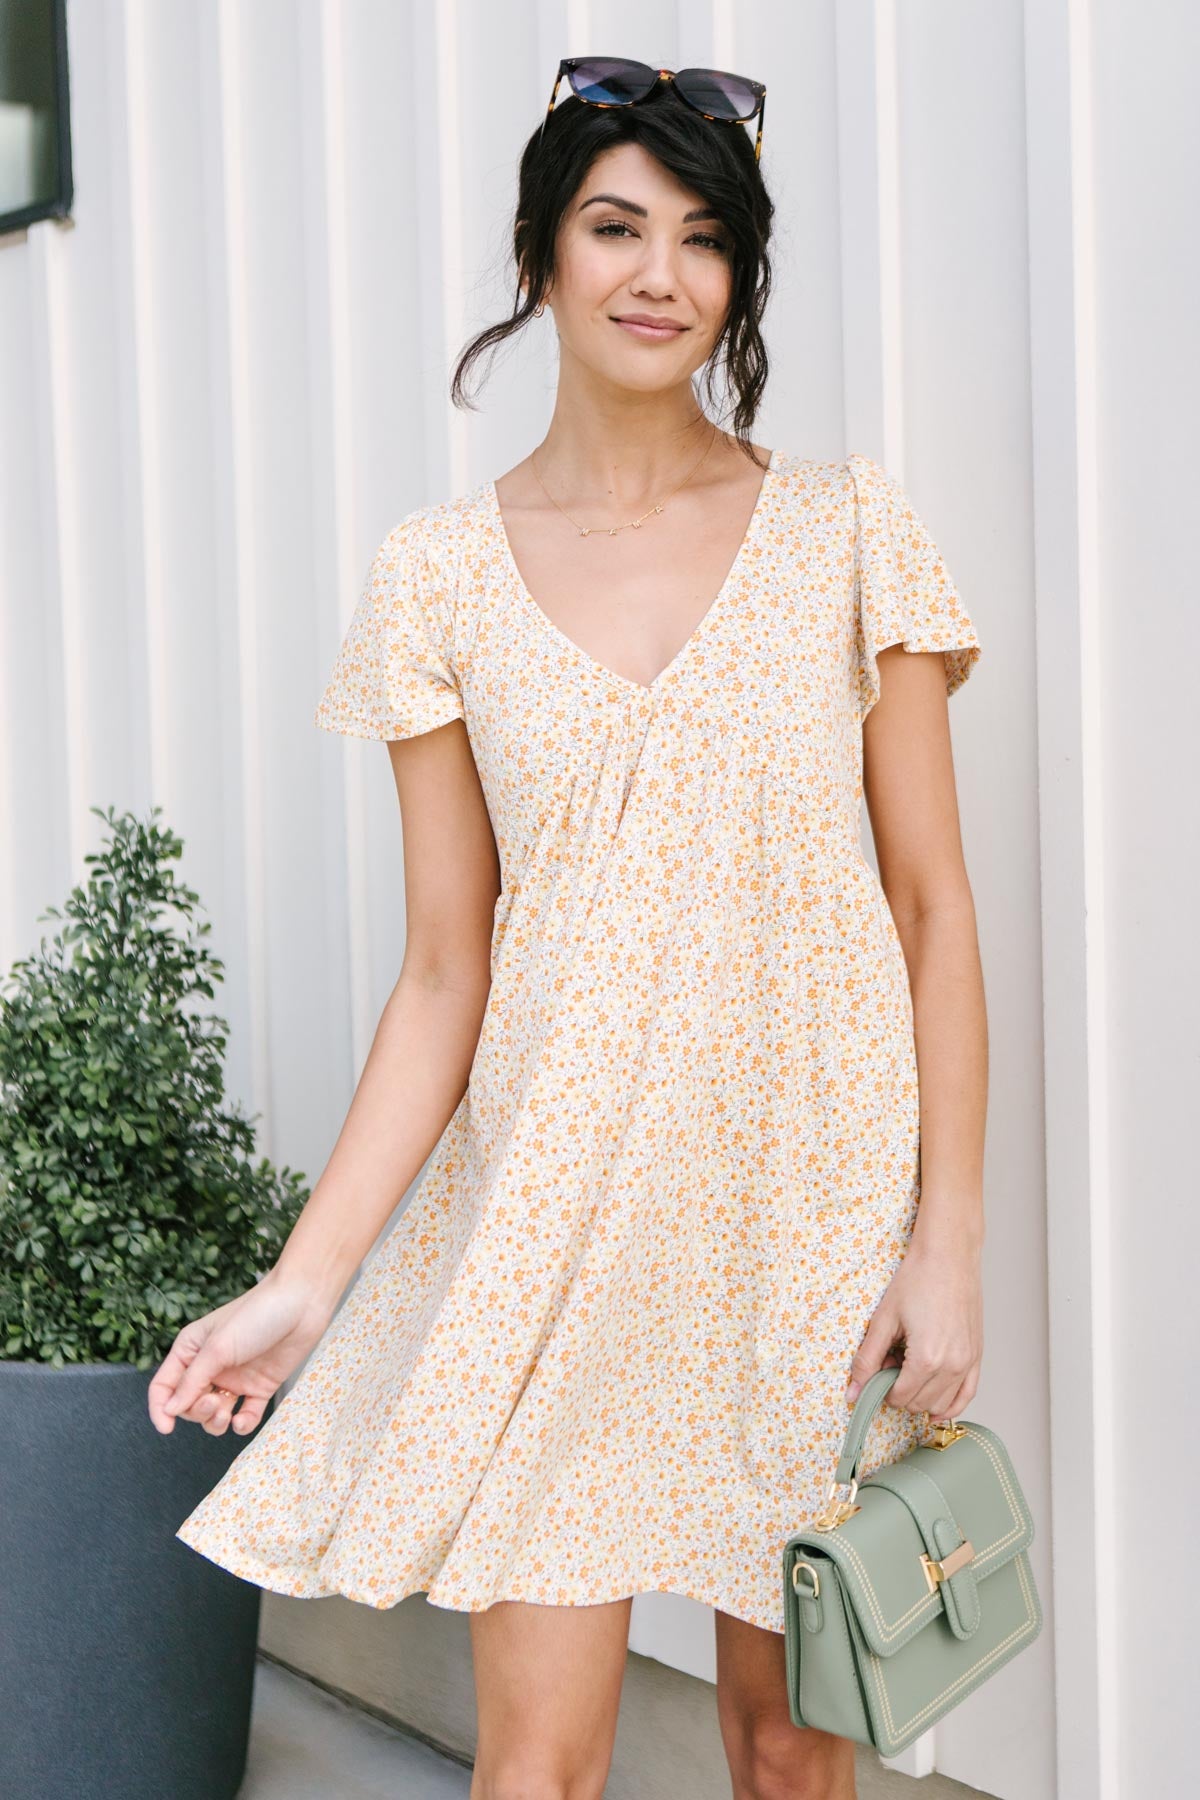 Freshly Picked Floral Dress in Yellow